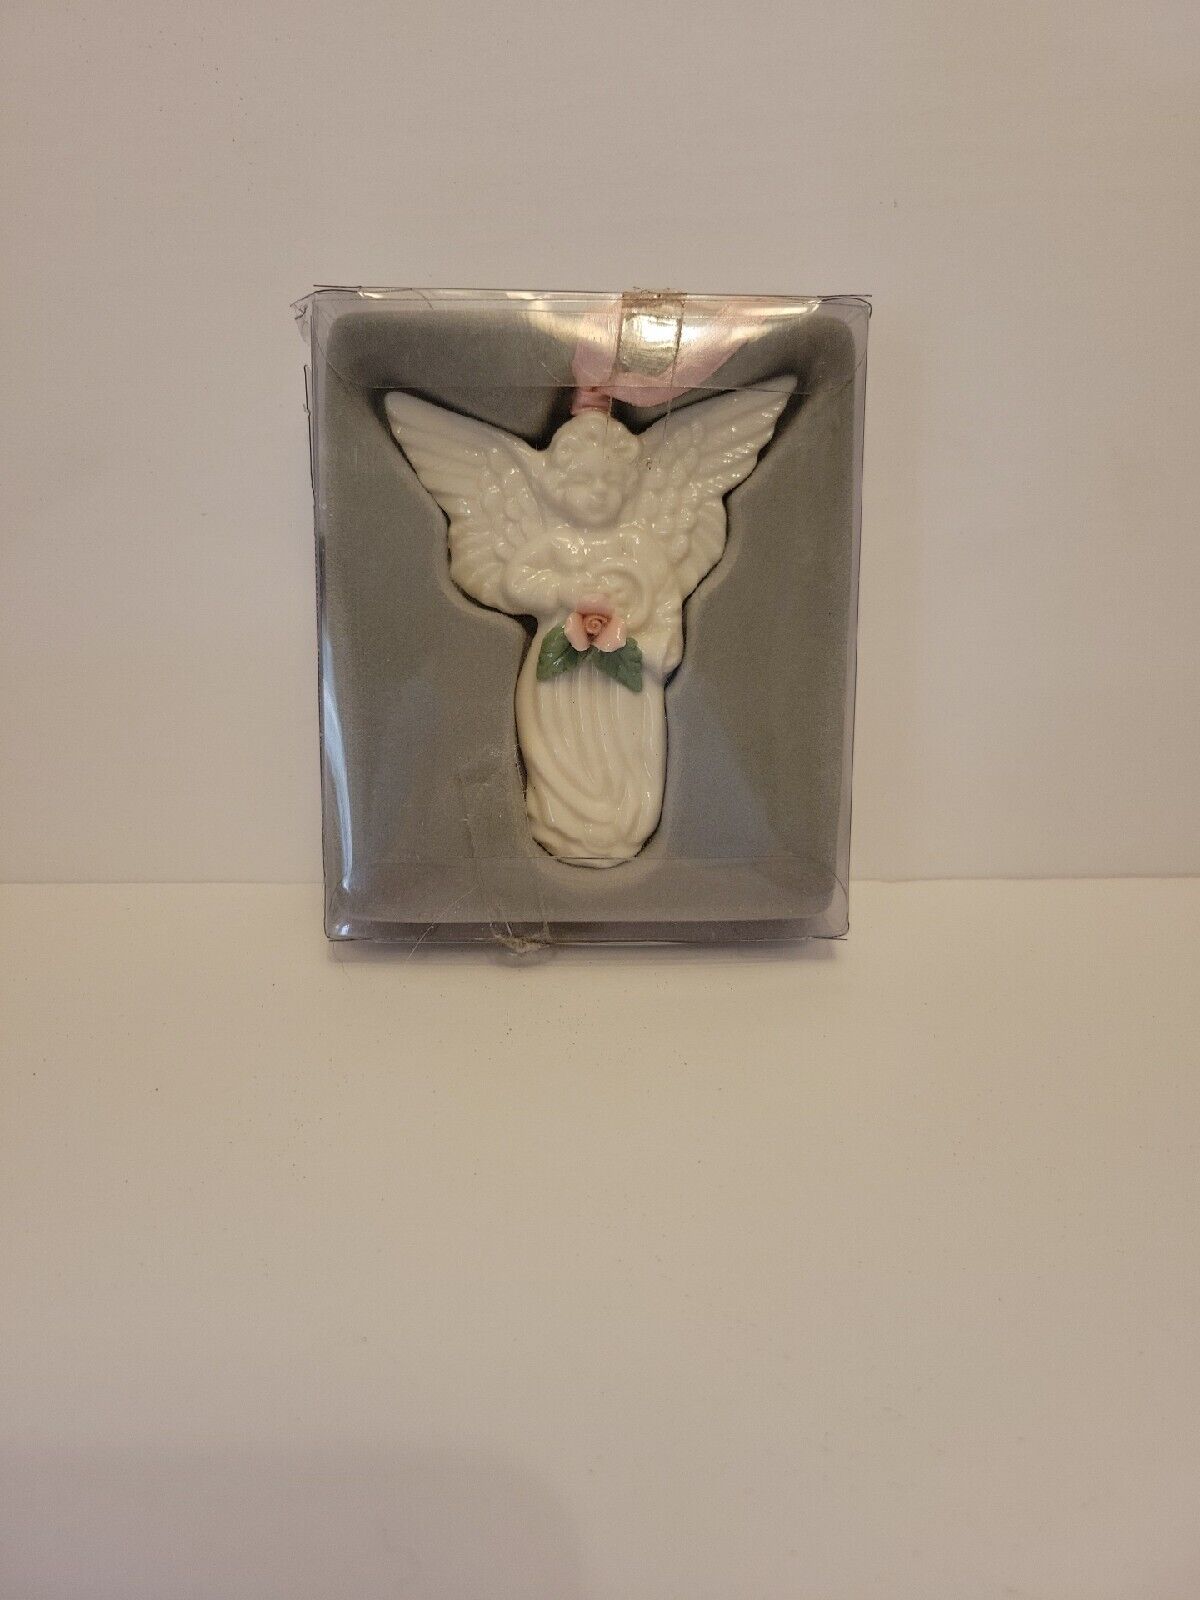 1928 Jewelry Co. Angel Holding Flowers Porcelain Ornament In Original Box